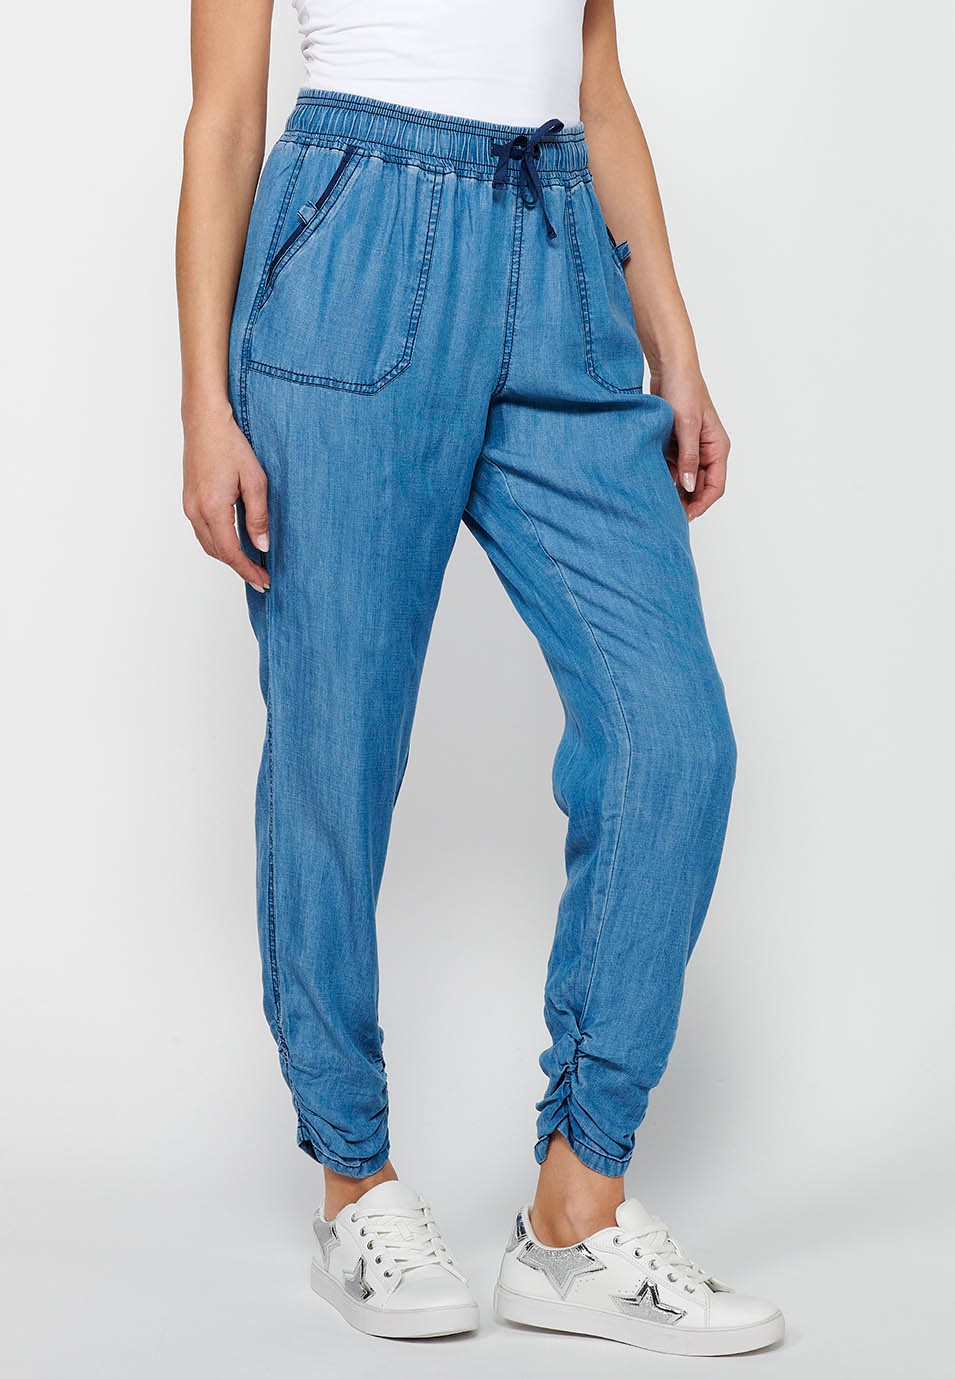 Long jogger pants with curled finish and rubberized waist with four pockets, two at the back with flap in Blue for Women 5